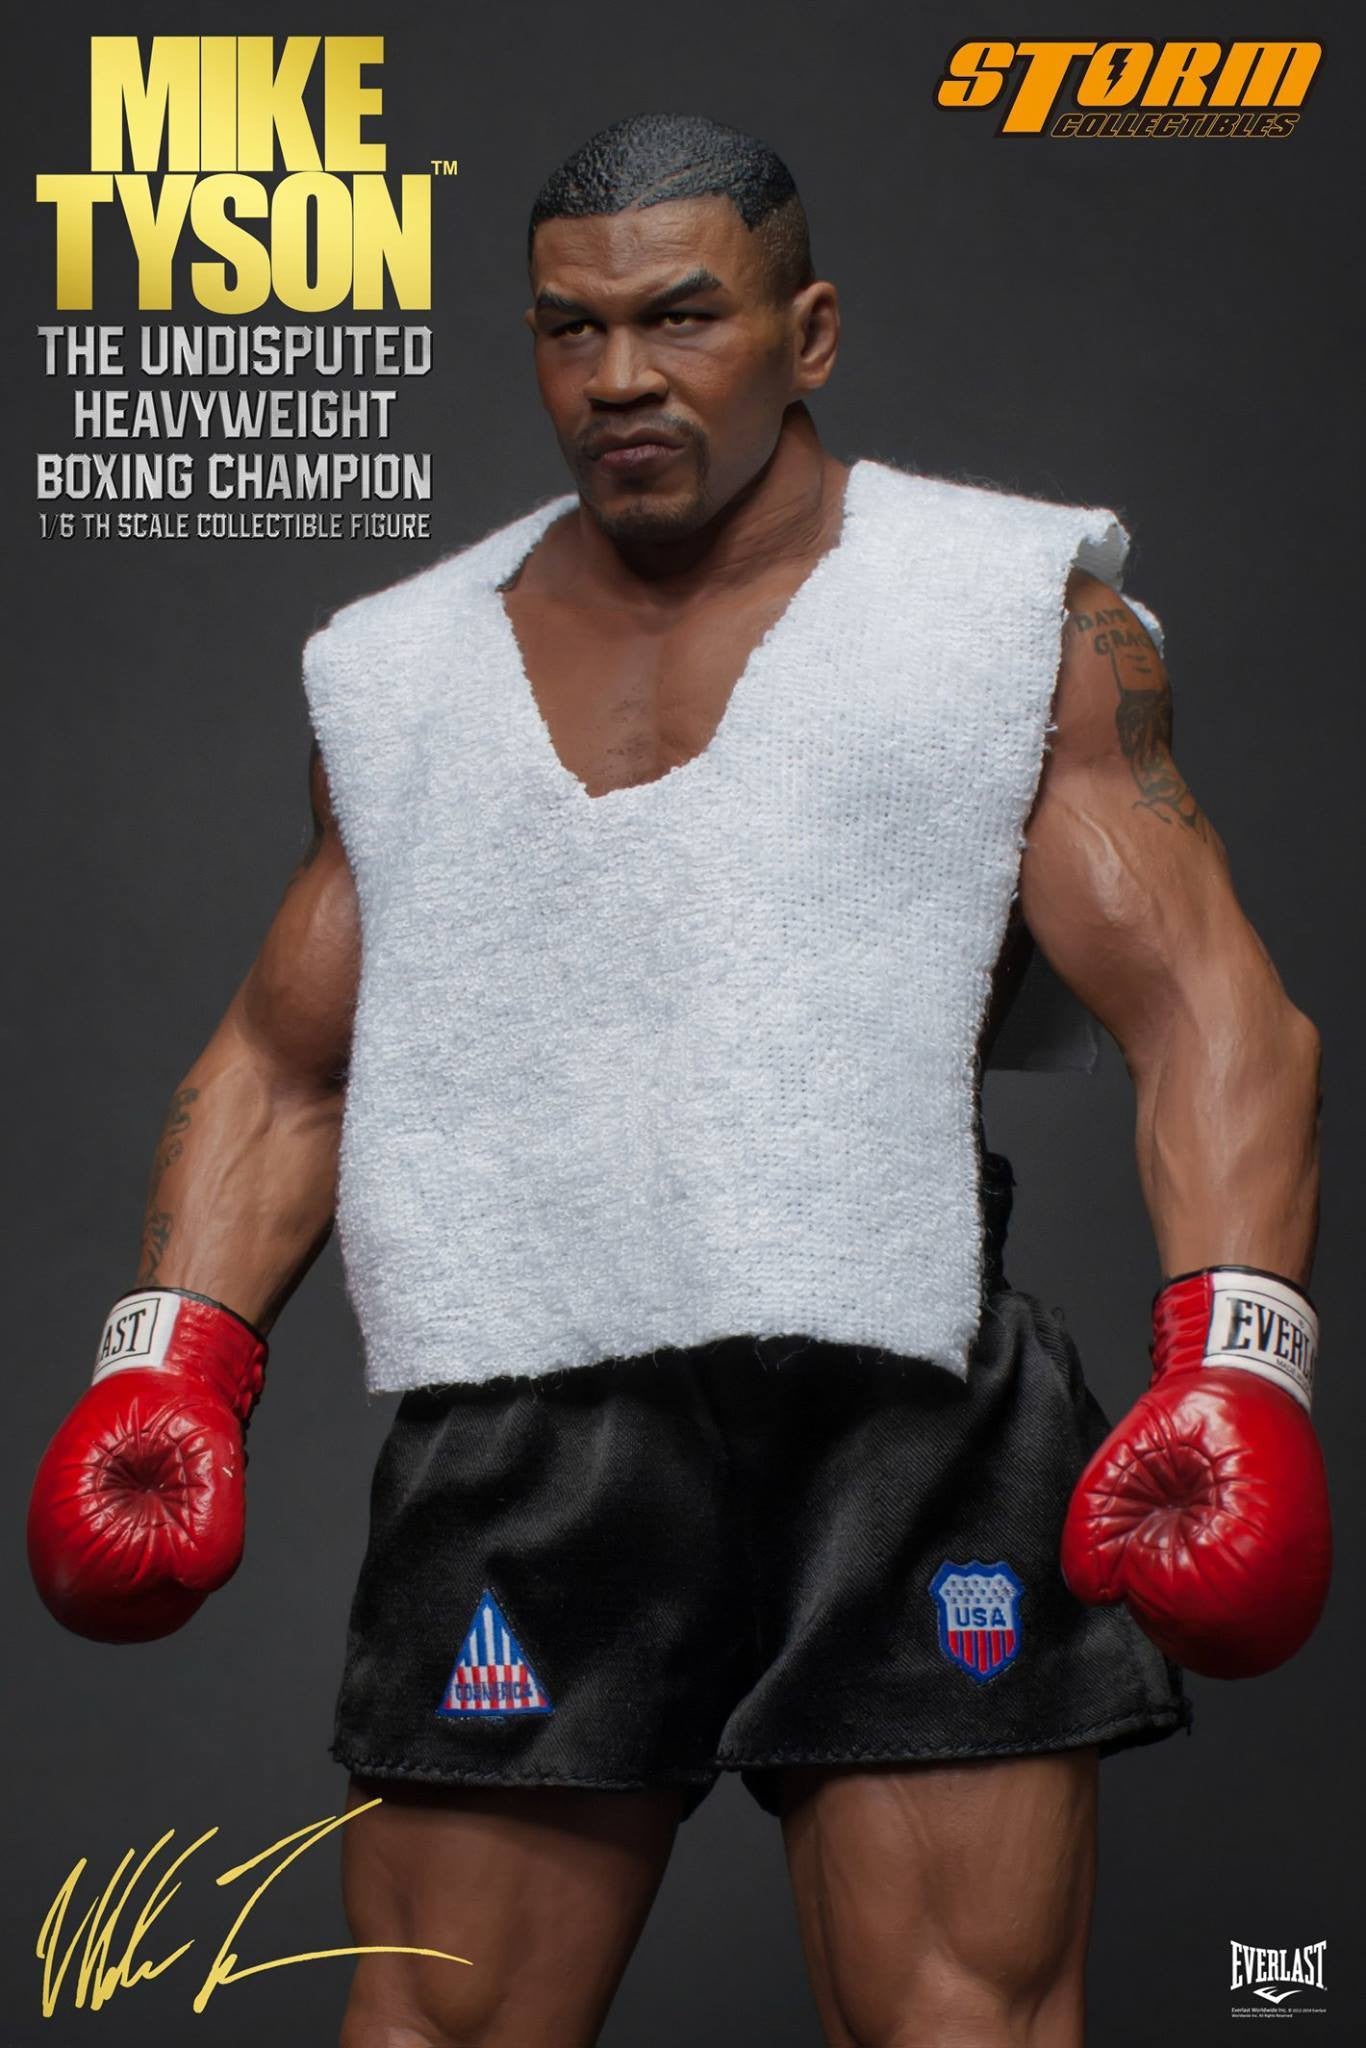 Storm Collectibles - 1:6 Scale Collectible Figure - Mike Tyson &quot;The Undisputed Heavyweight Boxing Champion&quot; - Marvelous Toys